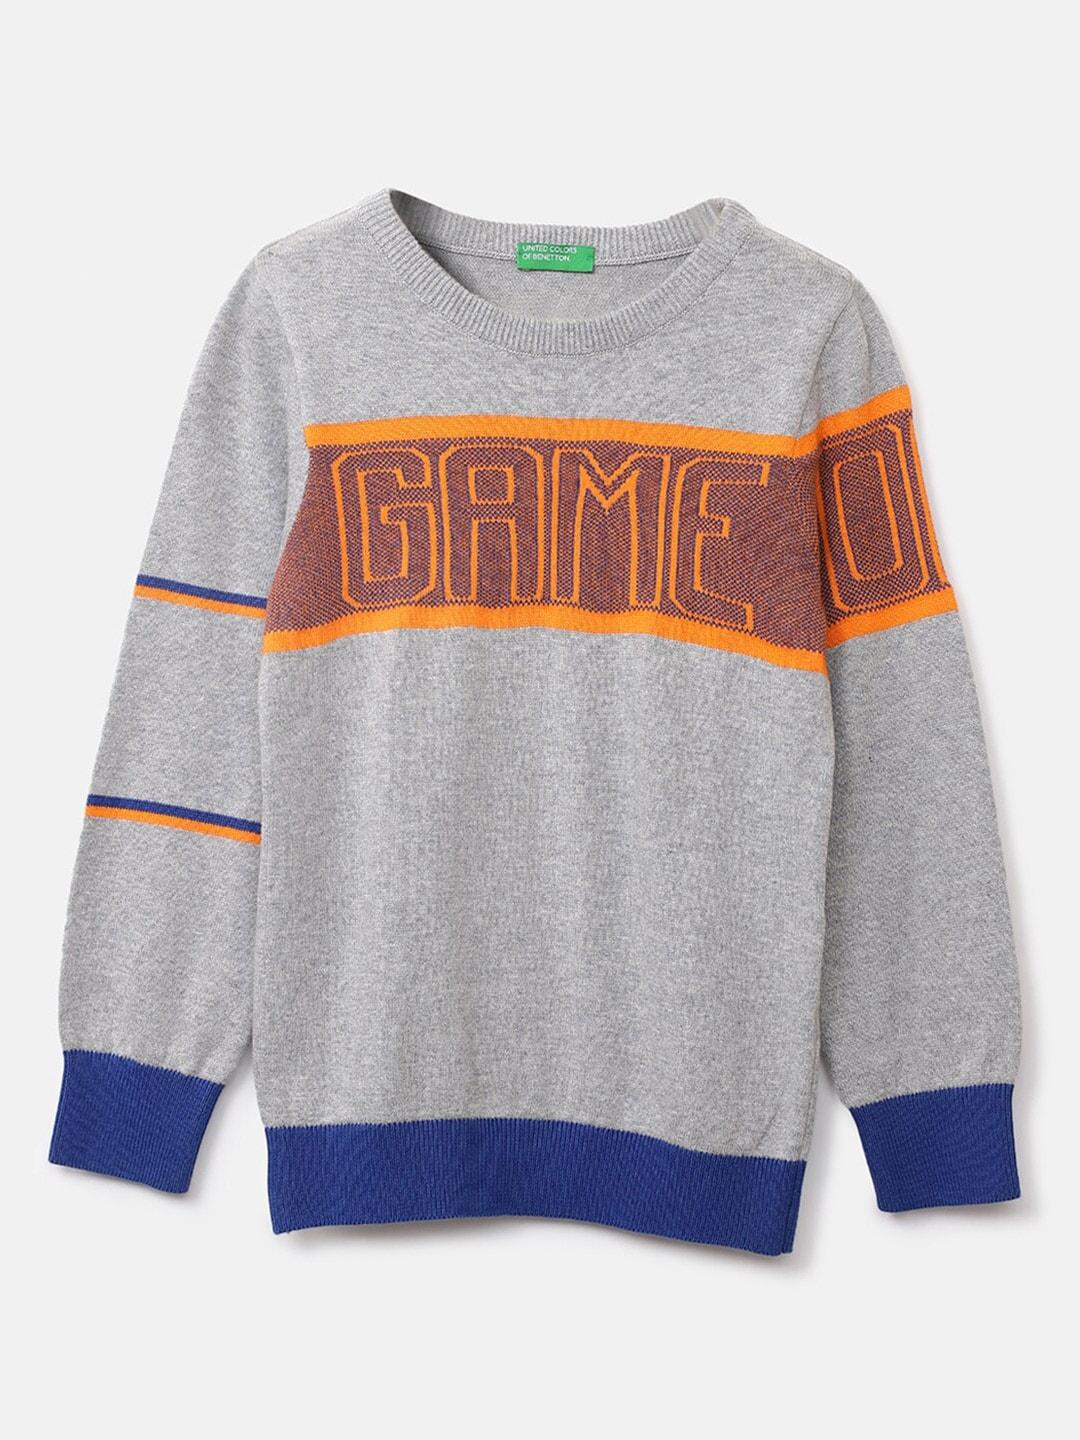 united-colors-of-benetton-boys-grey-&-orange-typography-printed-pullover